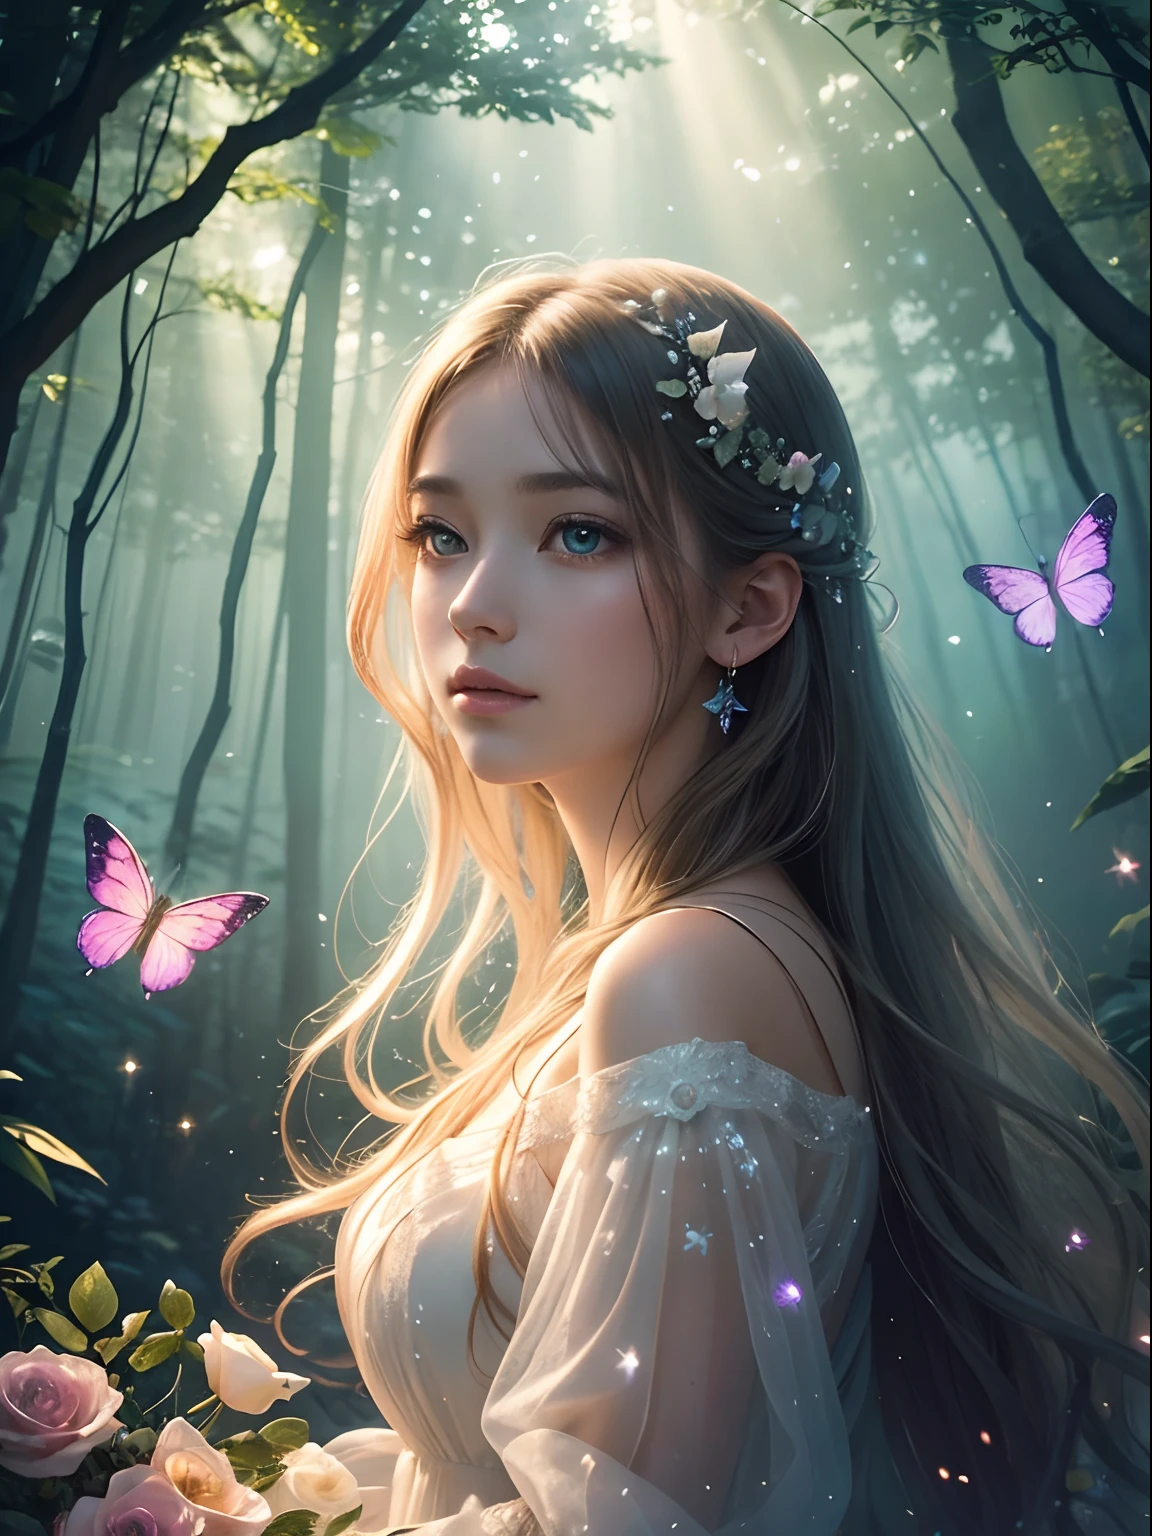 best quality,ultra-detailed,realistic,photography,portrait,ethereal lighting,dream-like atmosphere,beautiful girl,flowing dress,mystical forest,glowing butterflies,luminous flowers,colorful aura,rays of light,enchanted landscape,surreal elements,fantasy,sparkling stars,whimsical,illustration,vibrant colors,soft focus,magical ambiance,ethereal beauty,peaceful,serene,harmonious,otherworldly,lost in the moment,transformation,beauty in nature,tranquil,captivating,mesmerizing,unforgettable